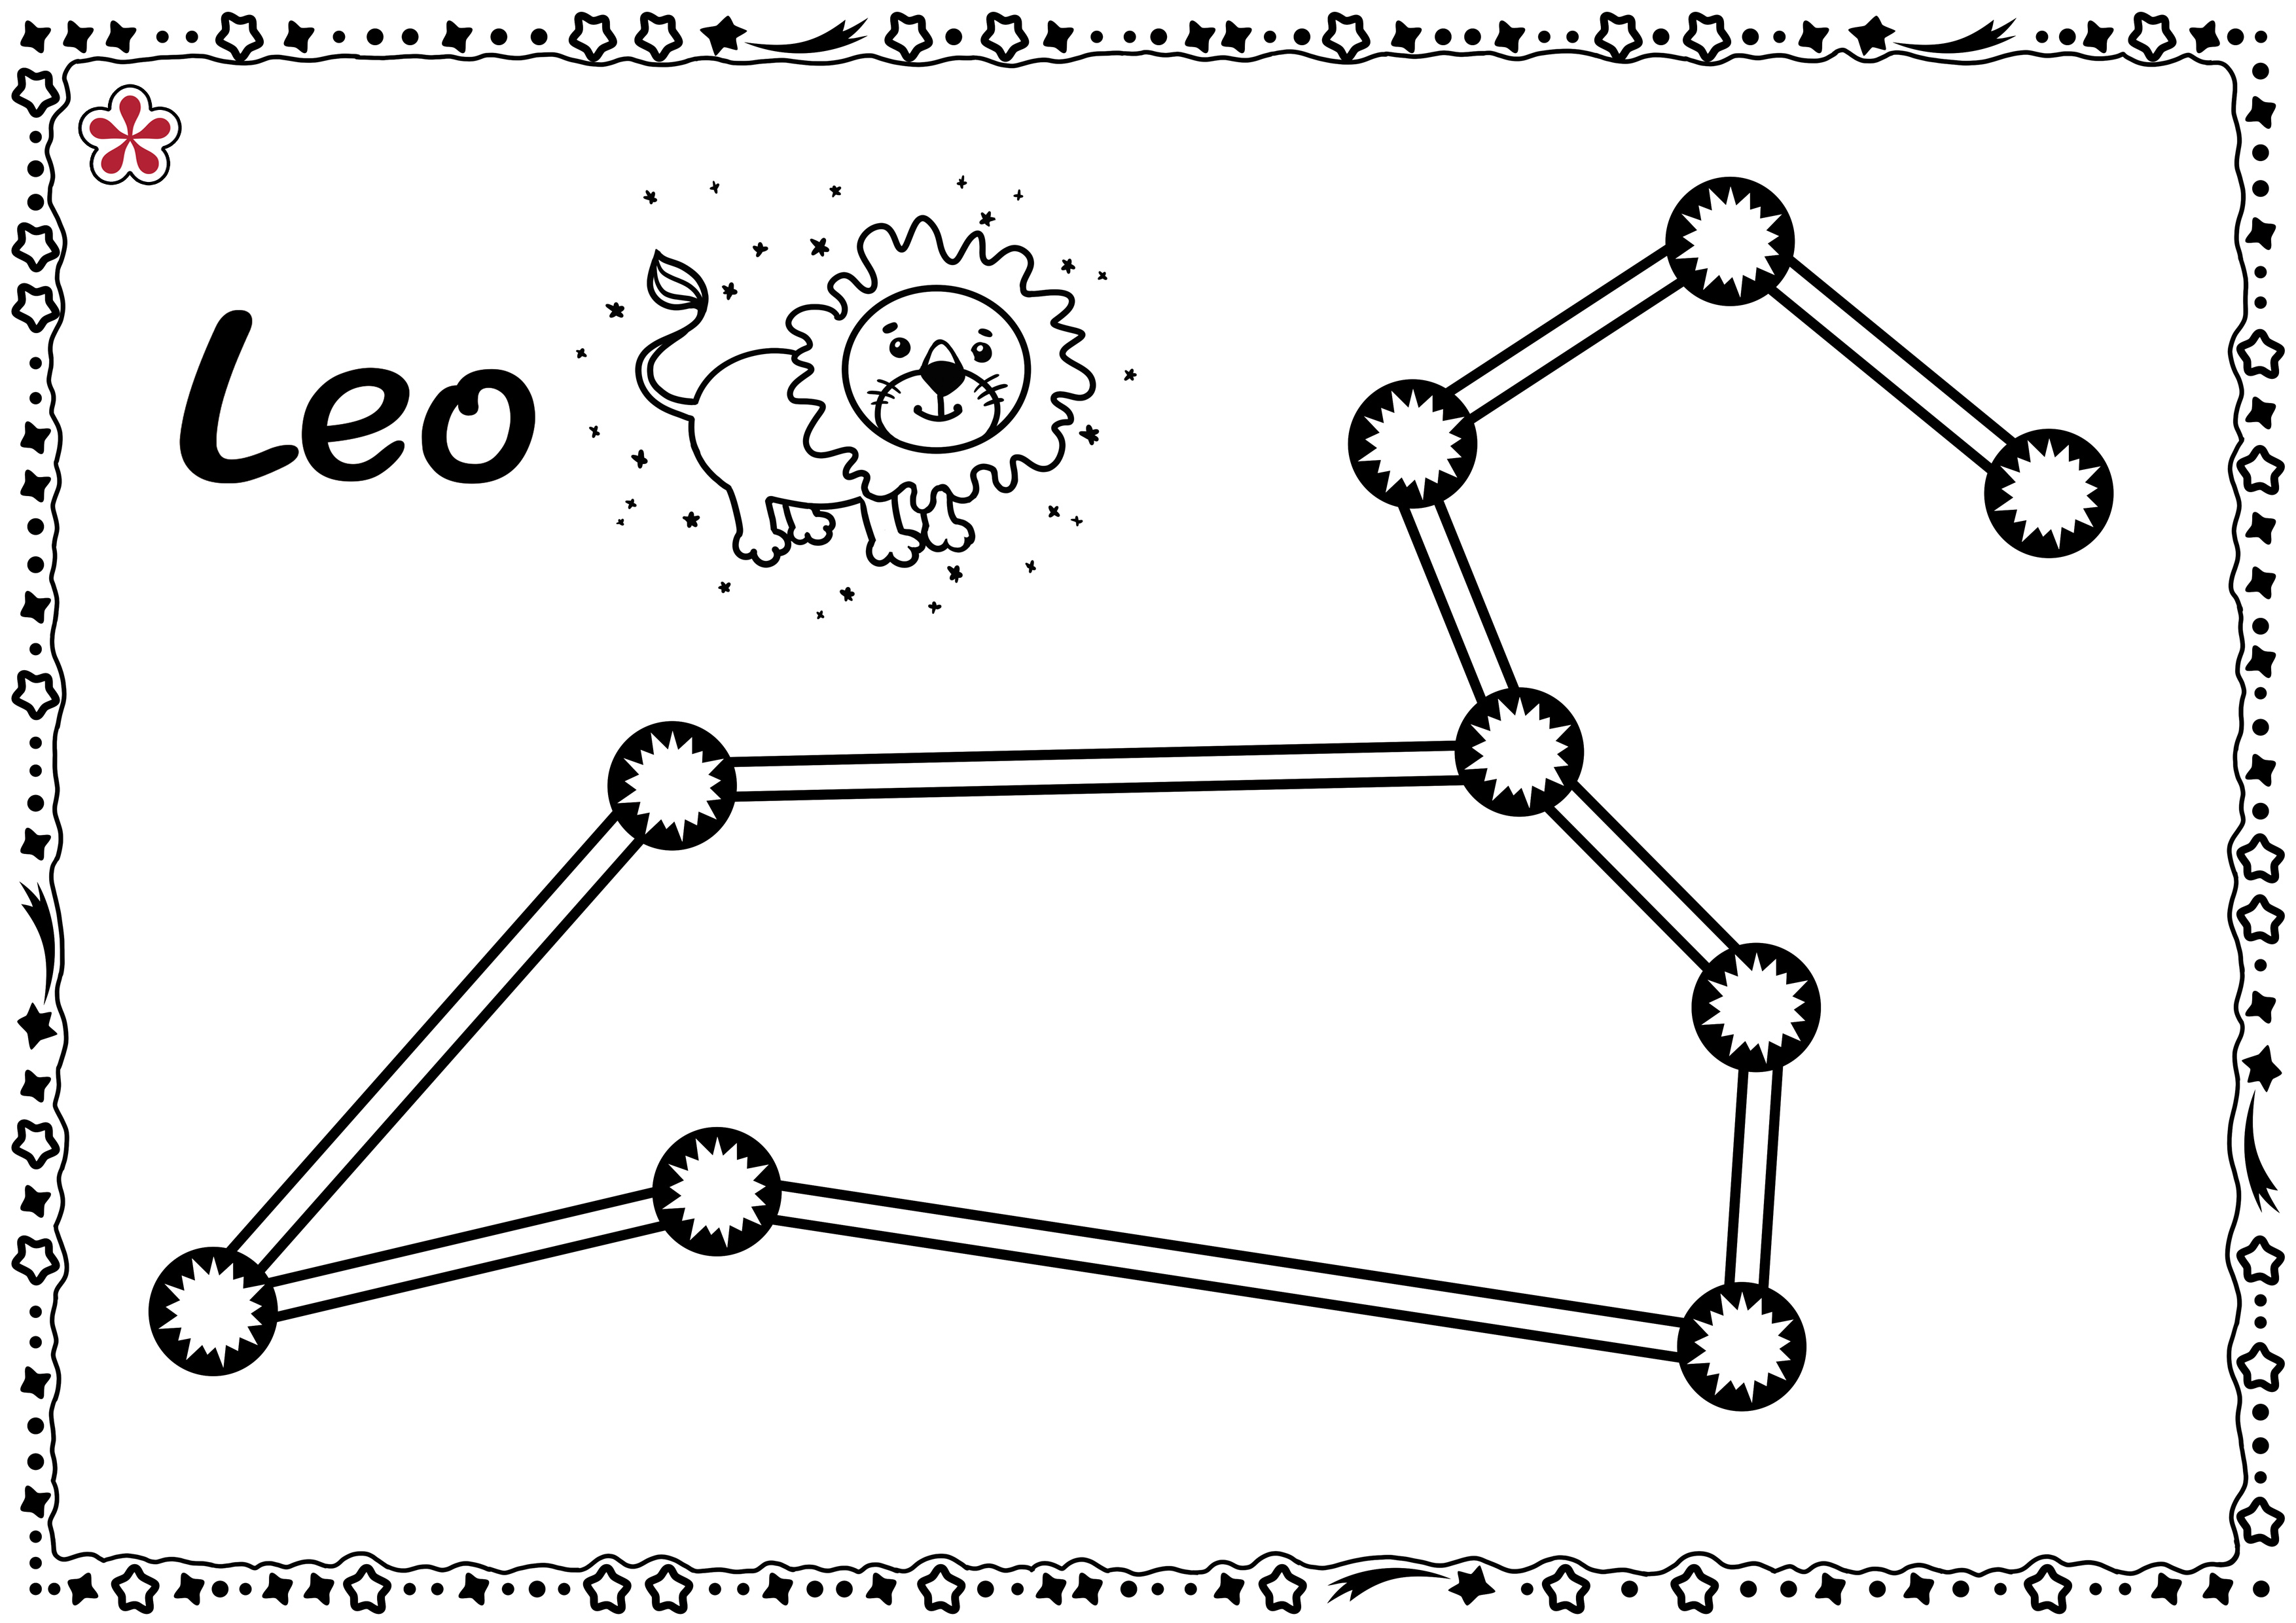 Constellation Templates For Kids.